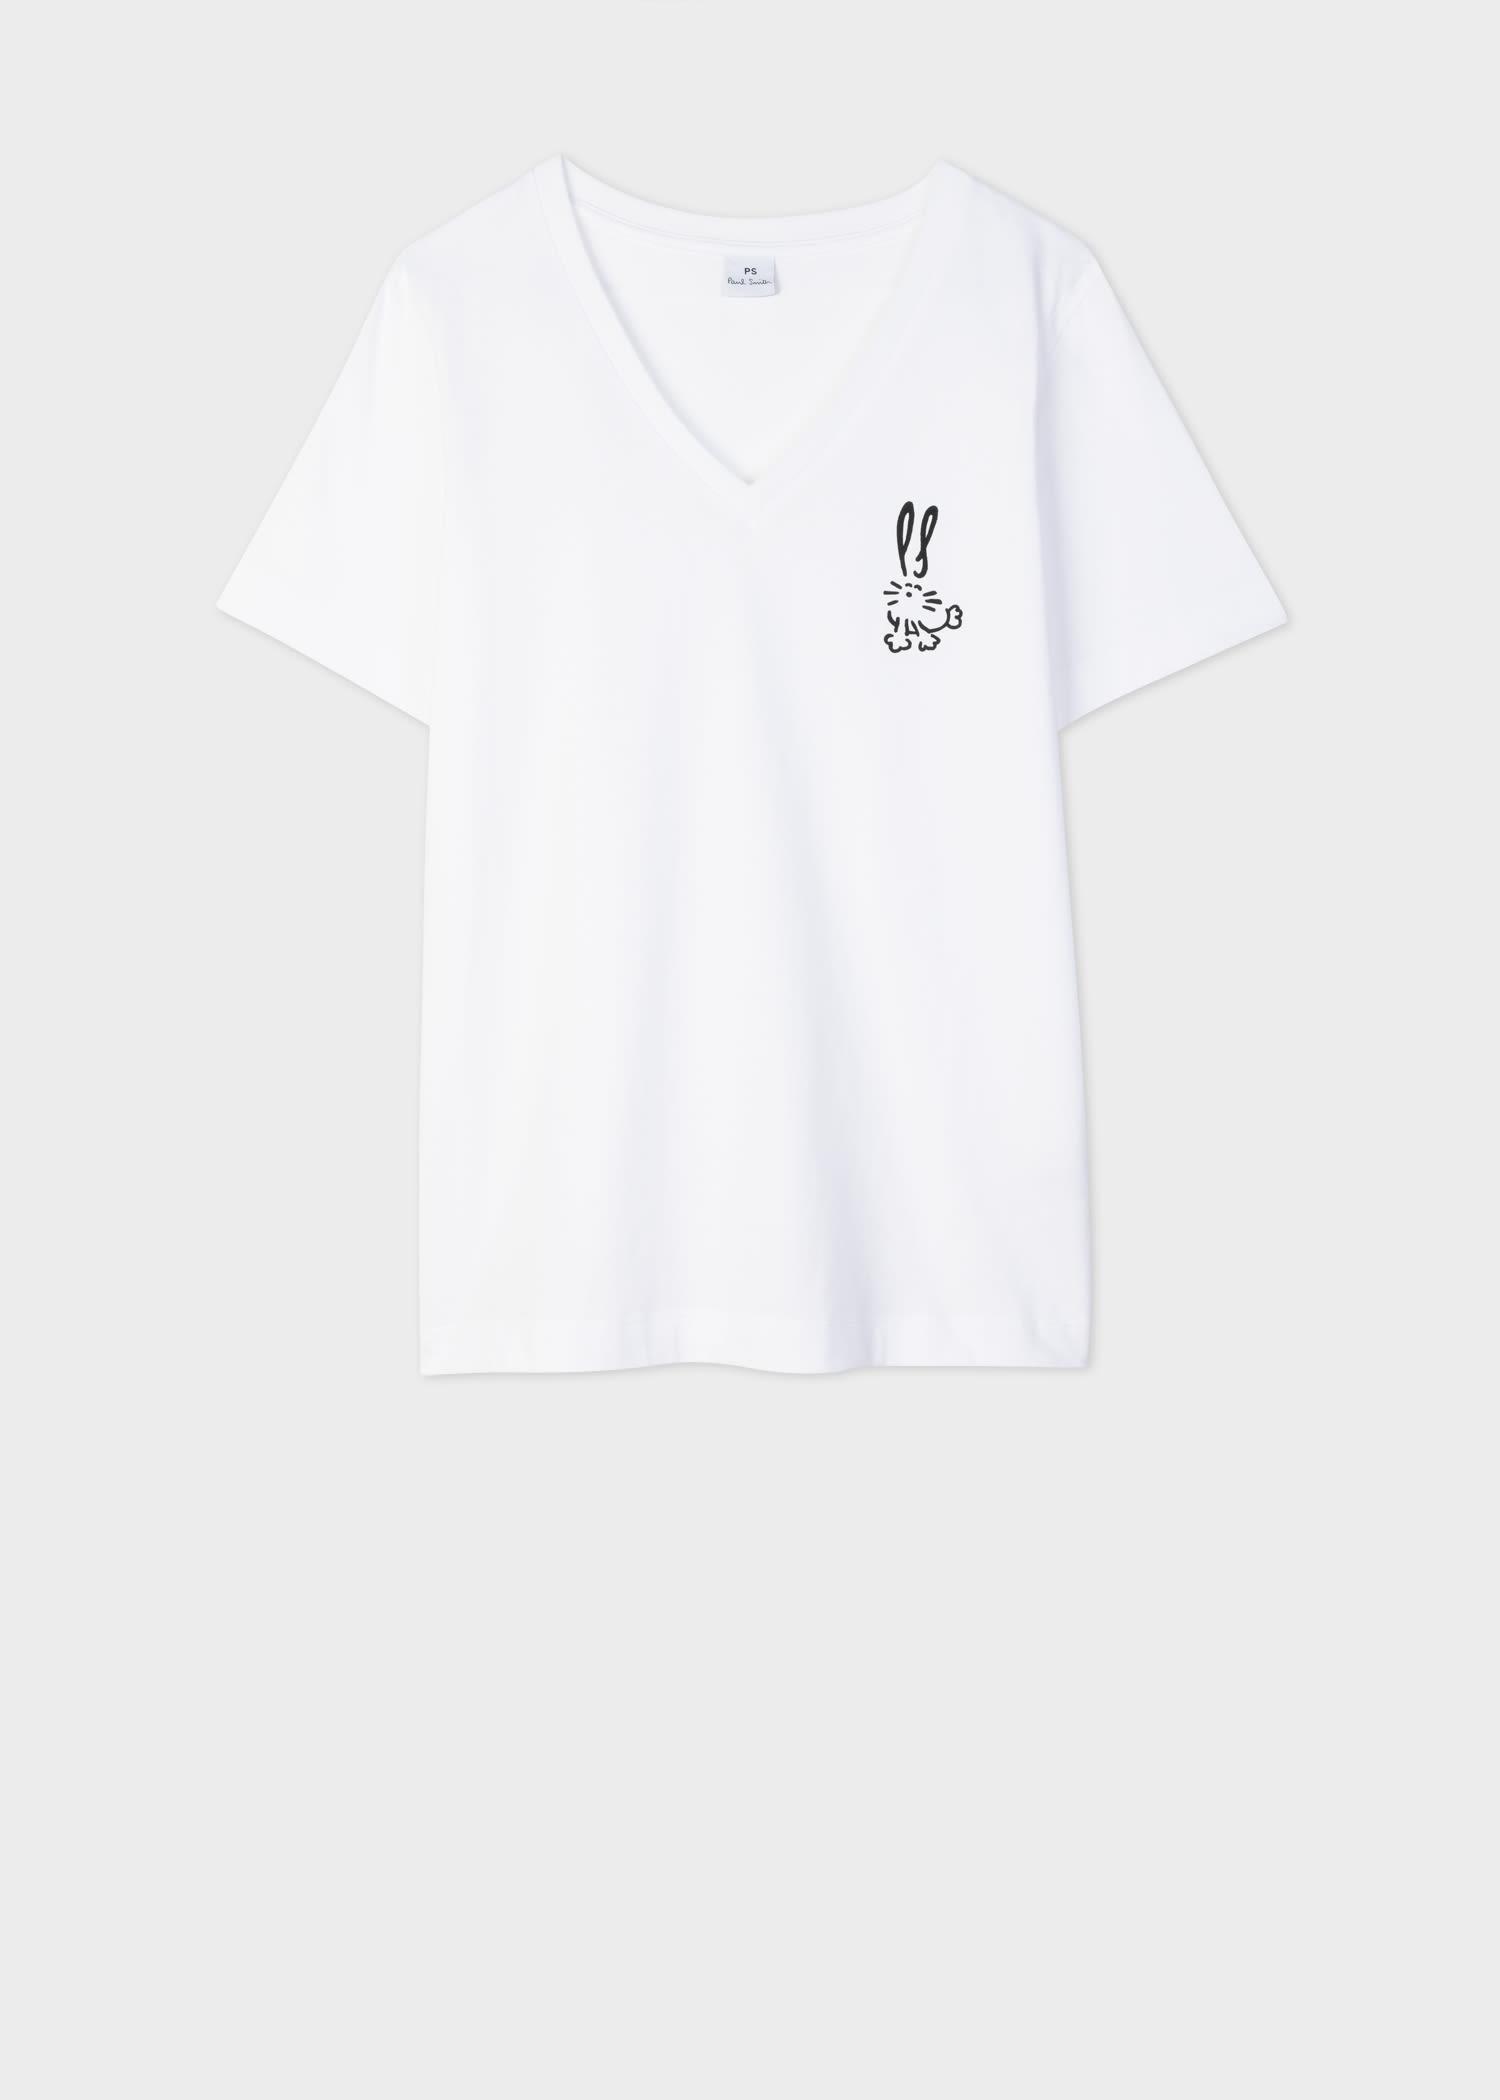 PS by Paul Smith White V-neck 'lunar New Year' T-shirt | Lyst UK